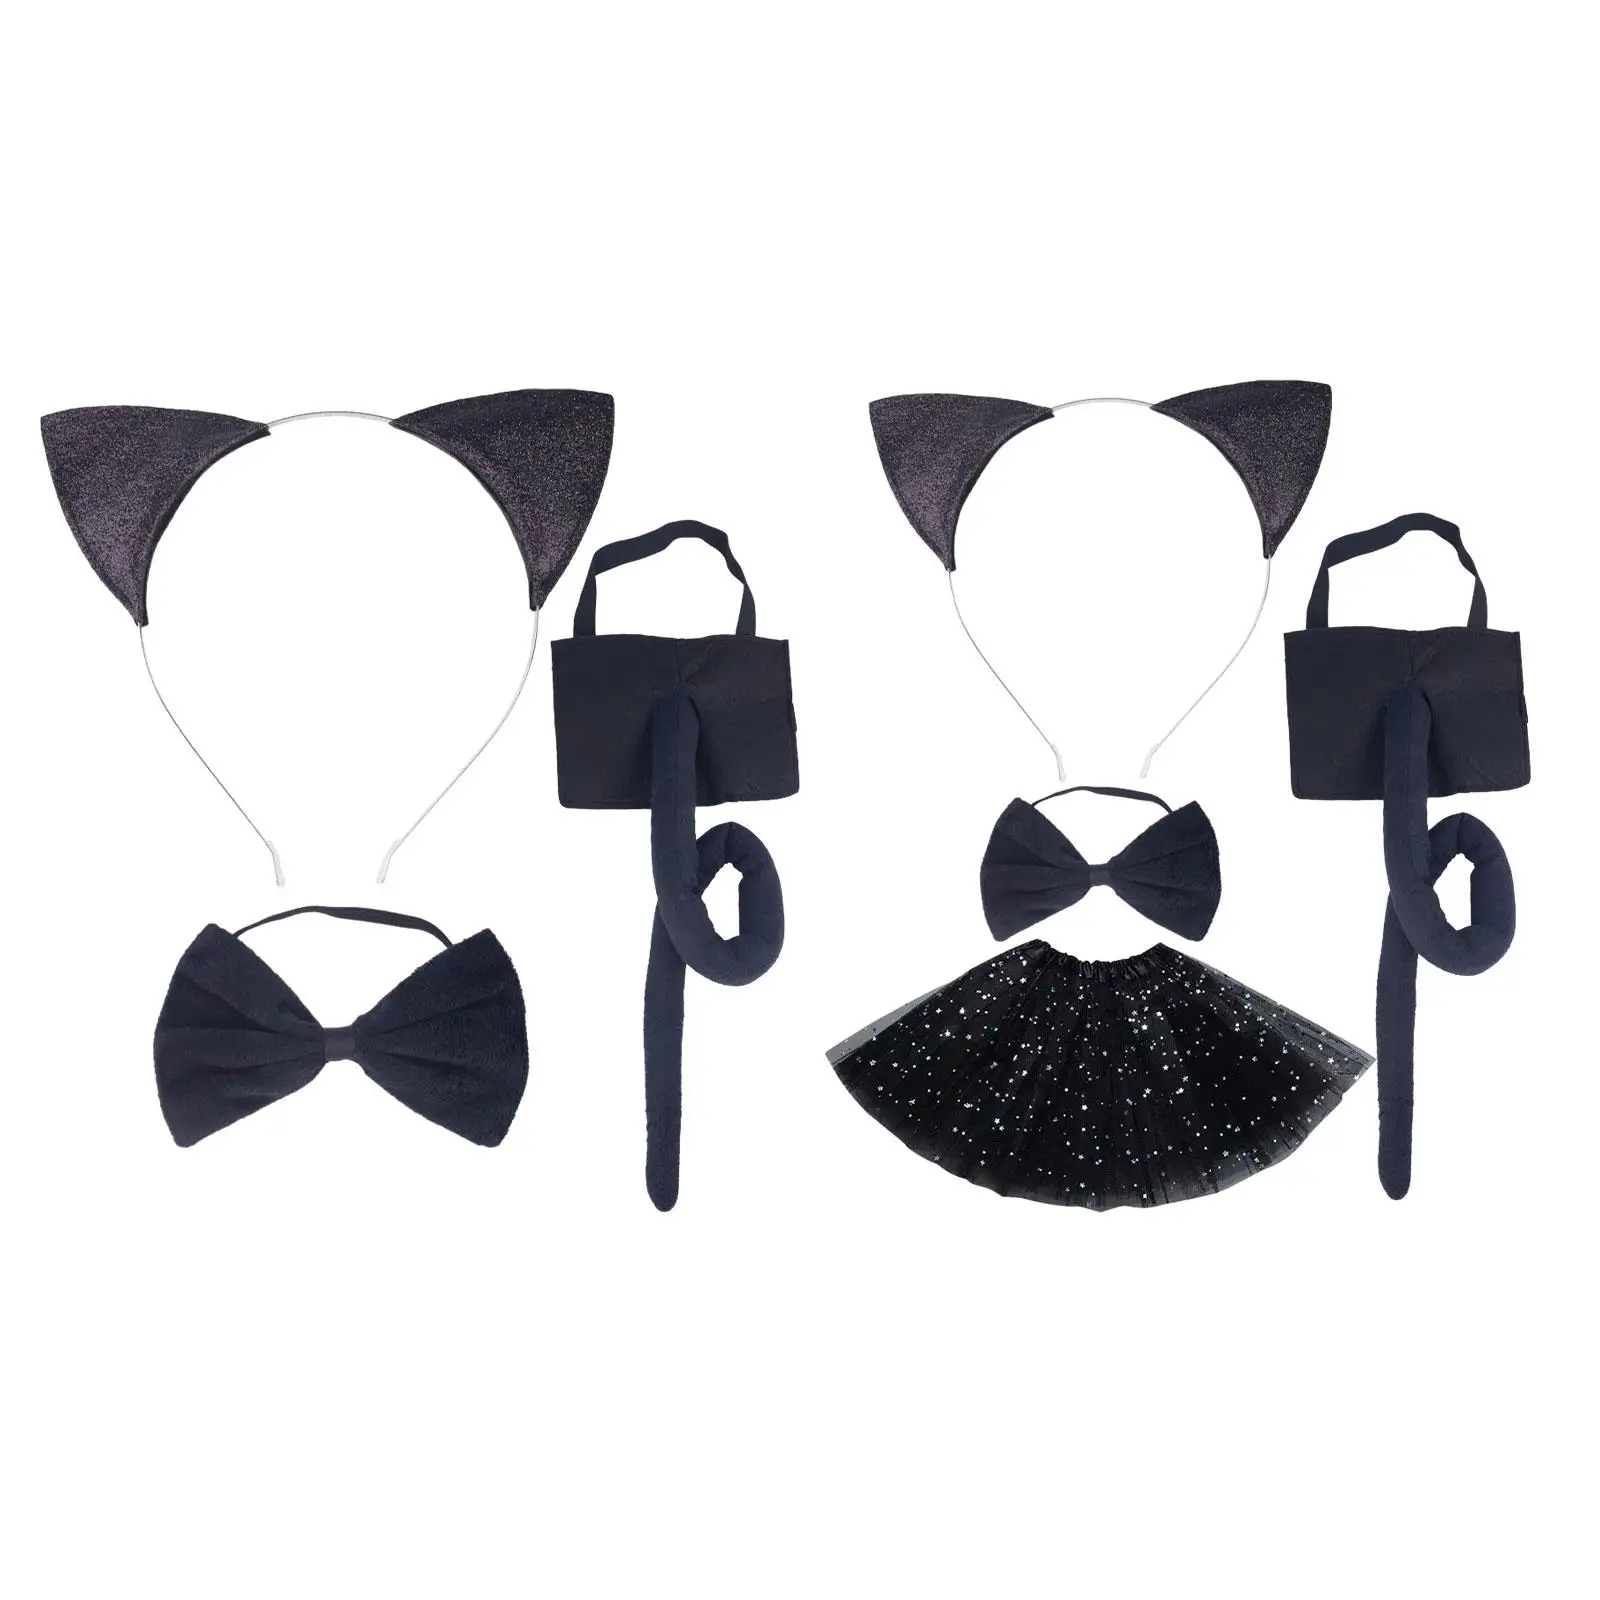 Kids , Bow Tie and Tail Set Cosplay Decorative Creative Animal Costume Accessories for Children Dress up Themed Party